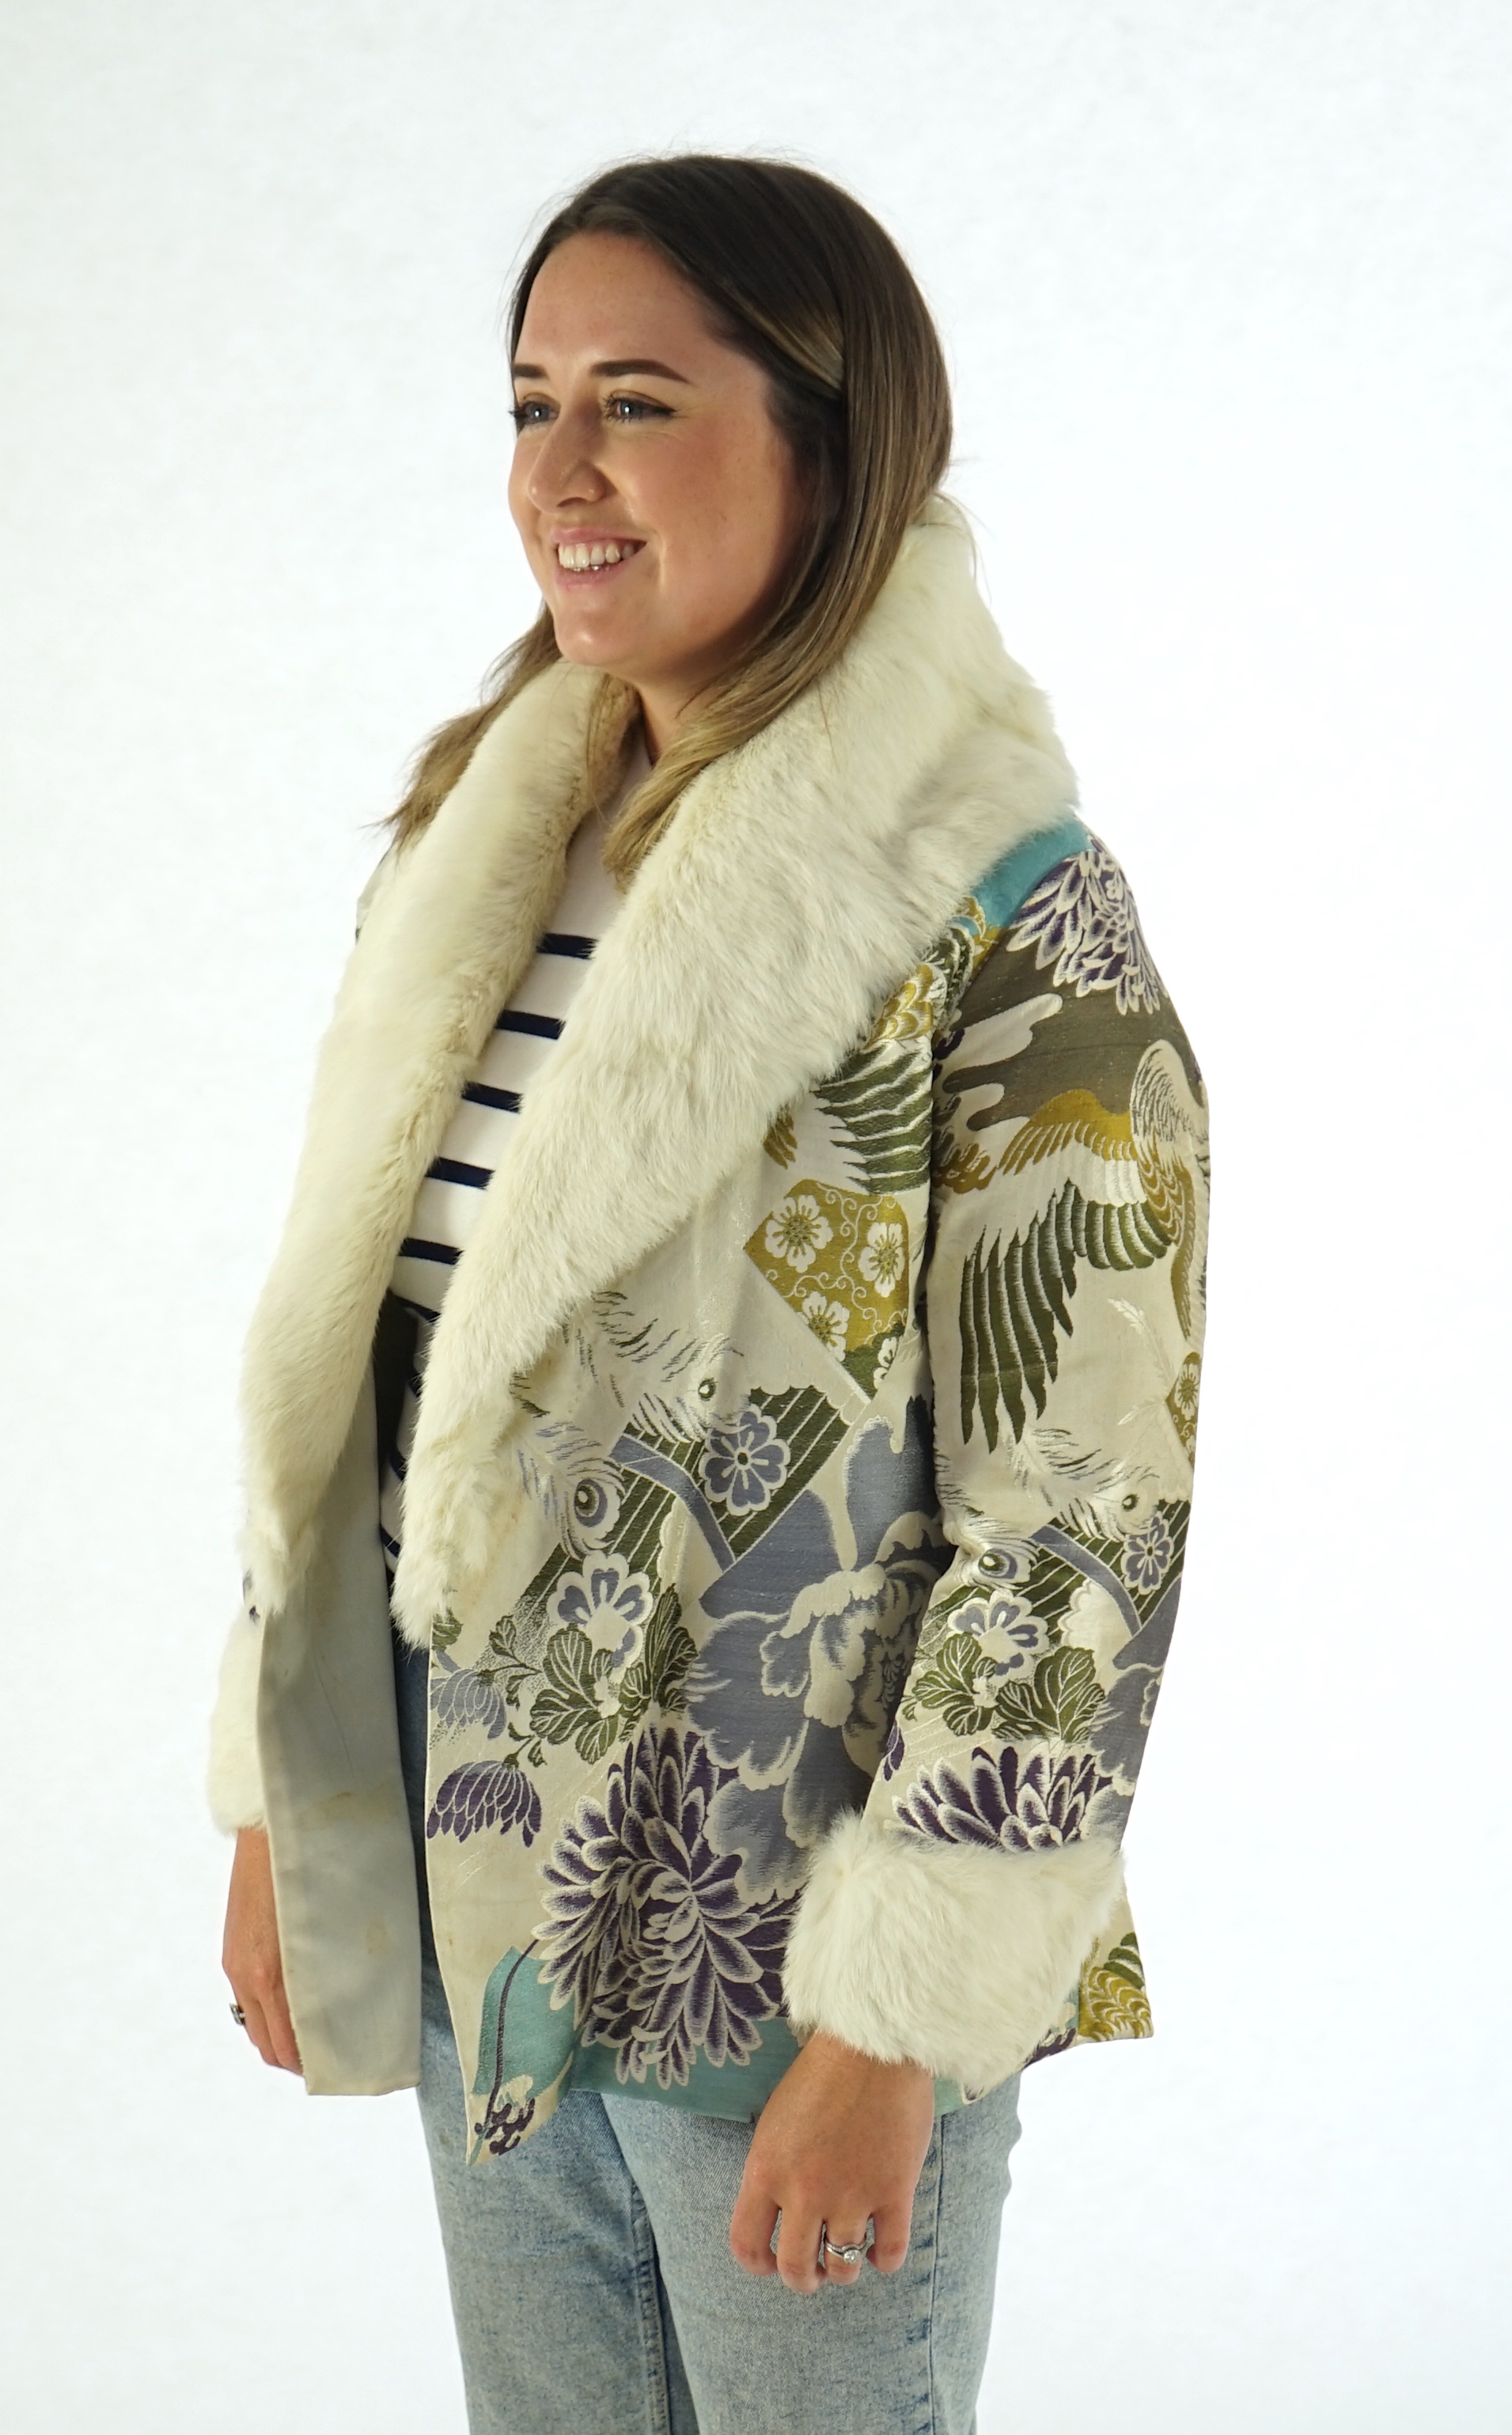 A 1940's lady's patterned brocade evening coat with white fur trim.